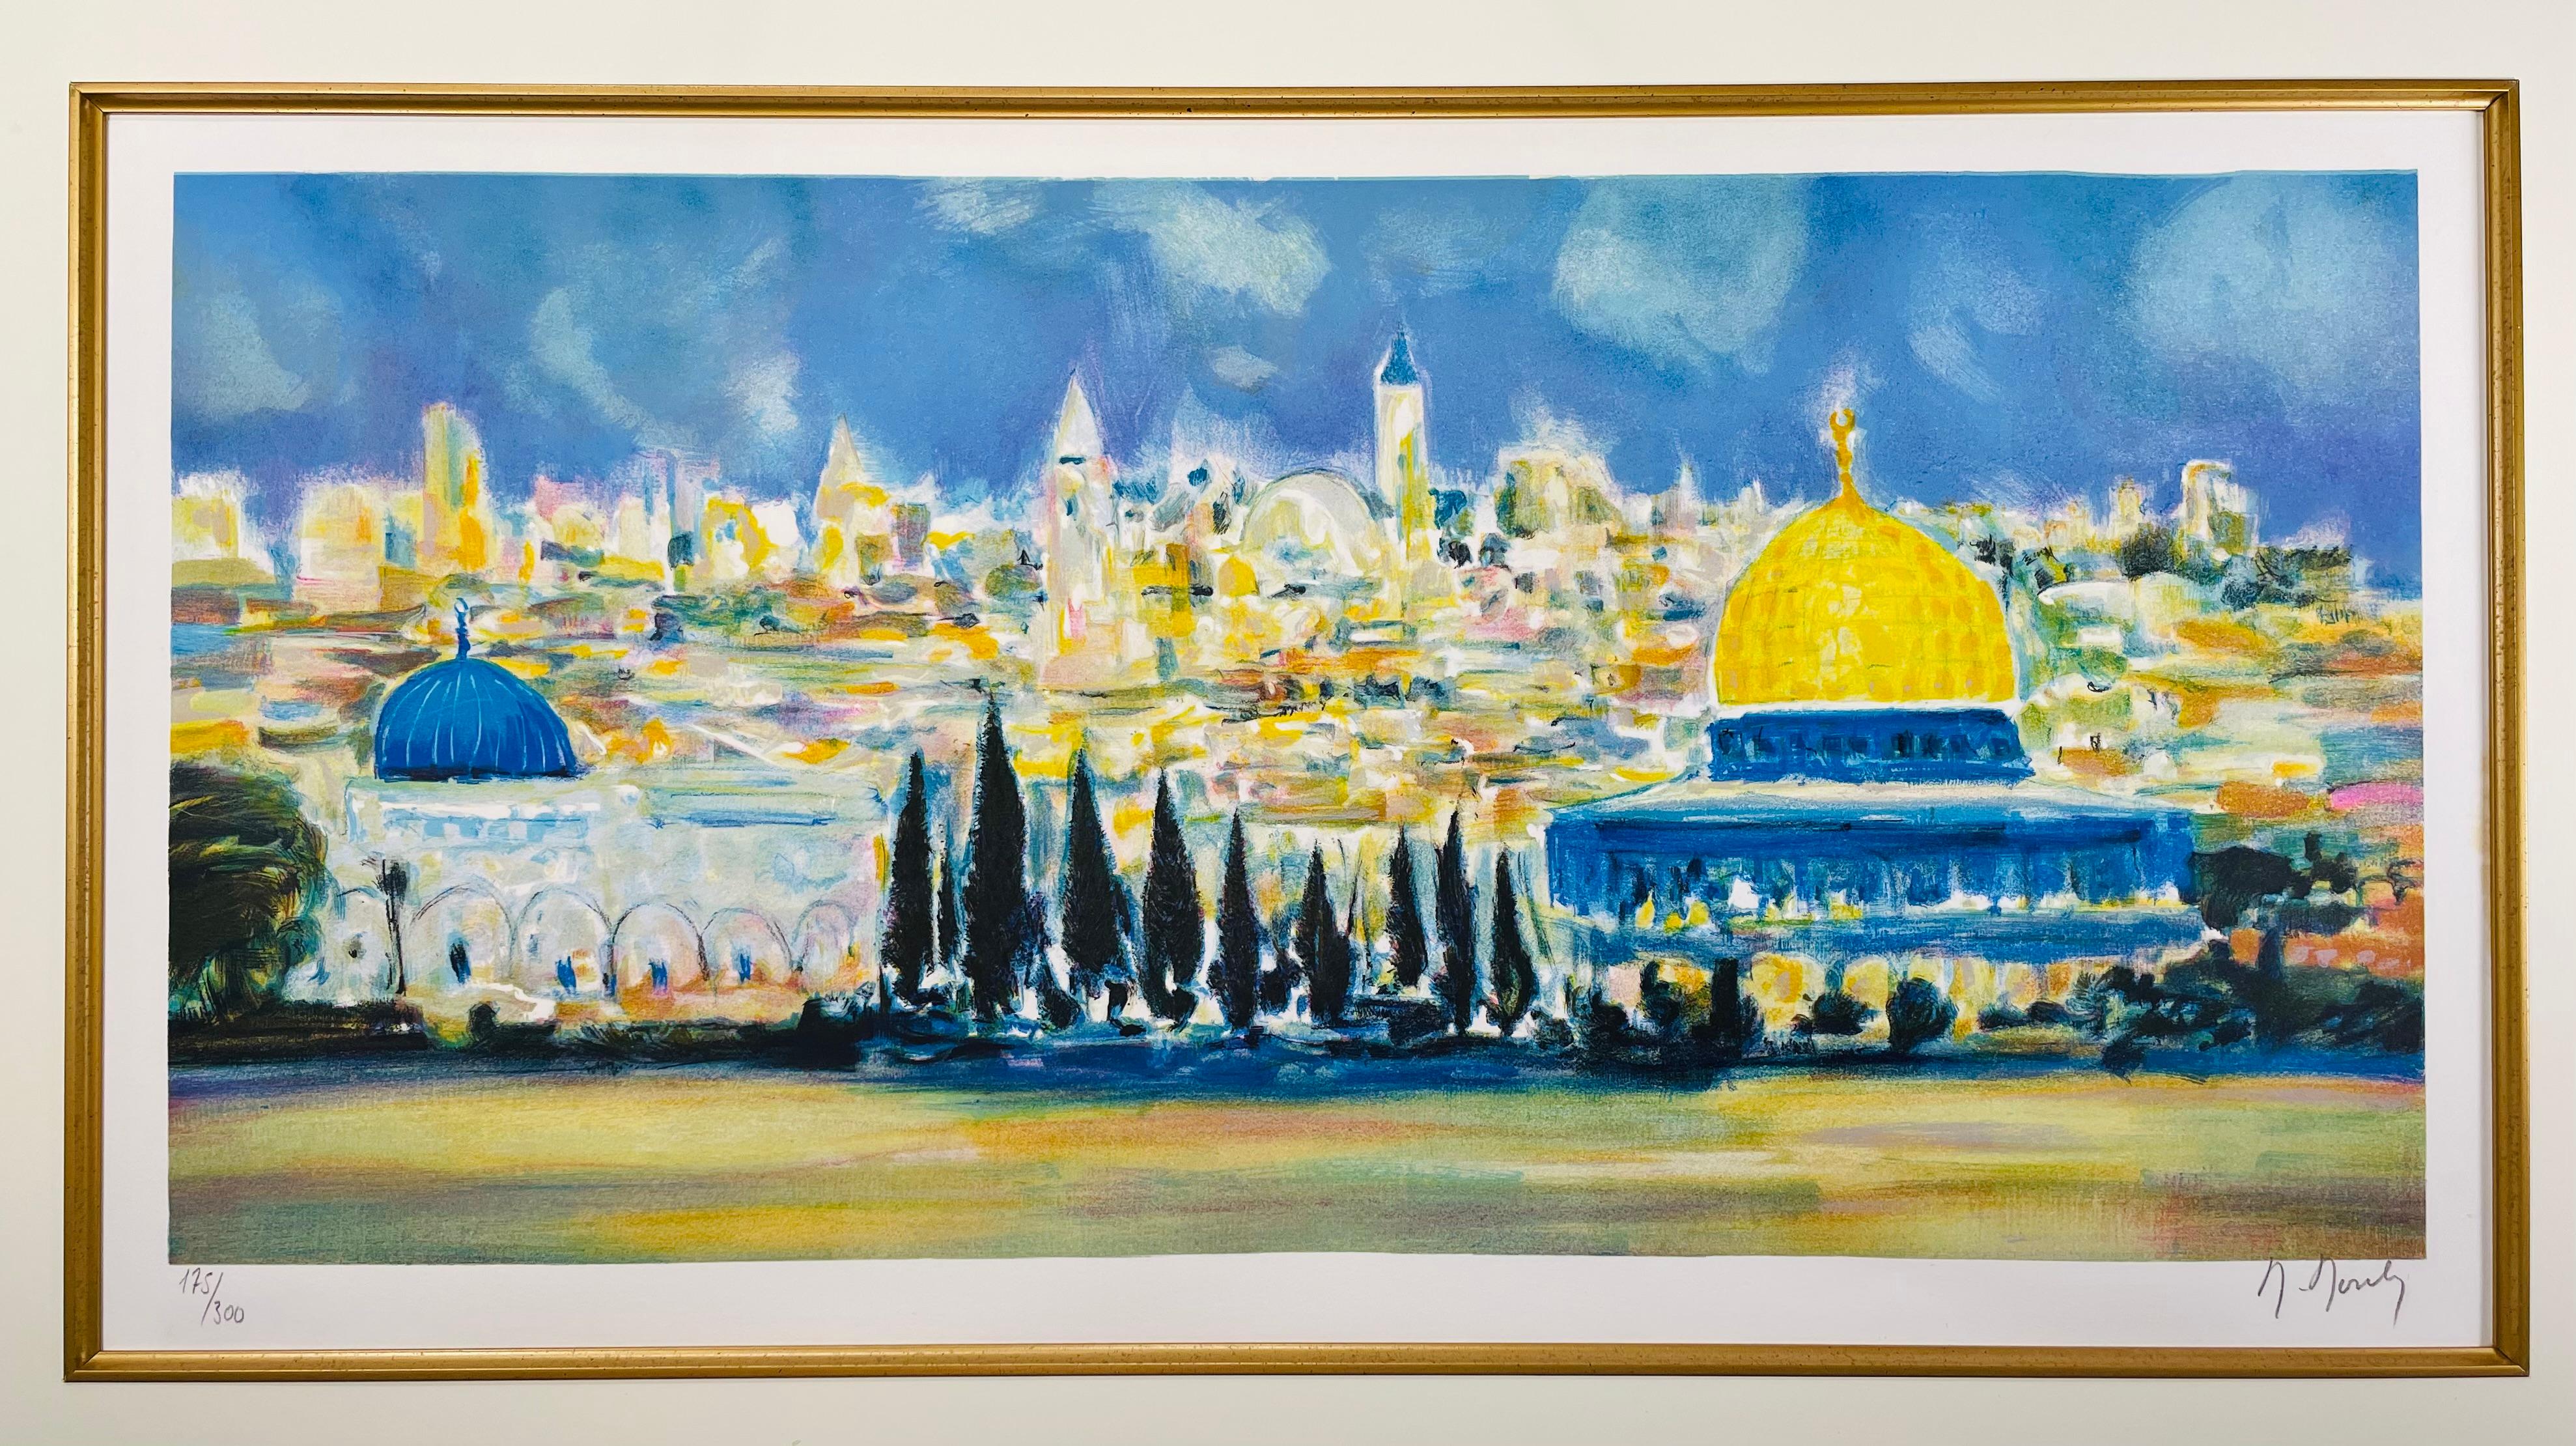 Marcel Mouly (French 1918 - 2008)  “Jerusalem”  lithograph on woven paper with deep saturated colors in excellent condition.  Well framed with acrylic cover, signed lower right, numbered 175/300 lower left.  Wonderful blues, greens in background